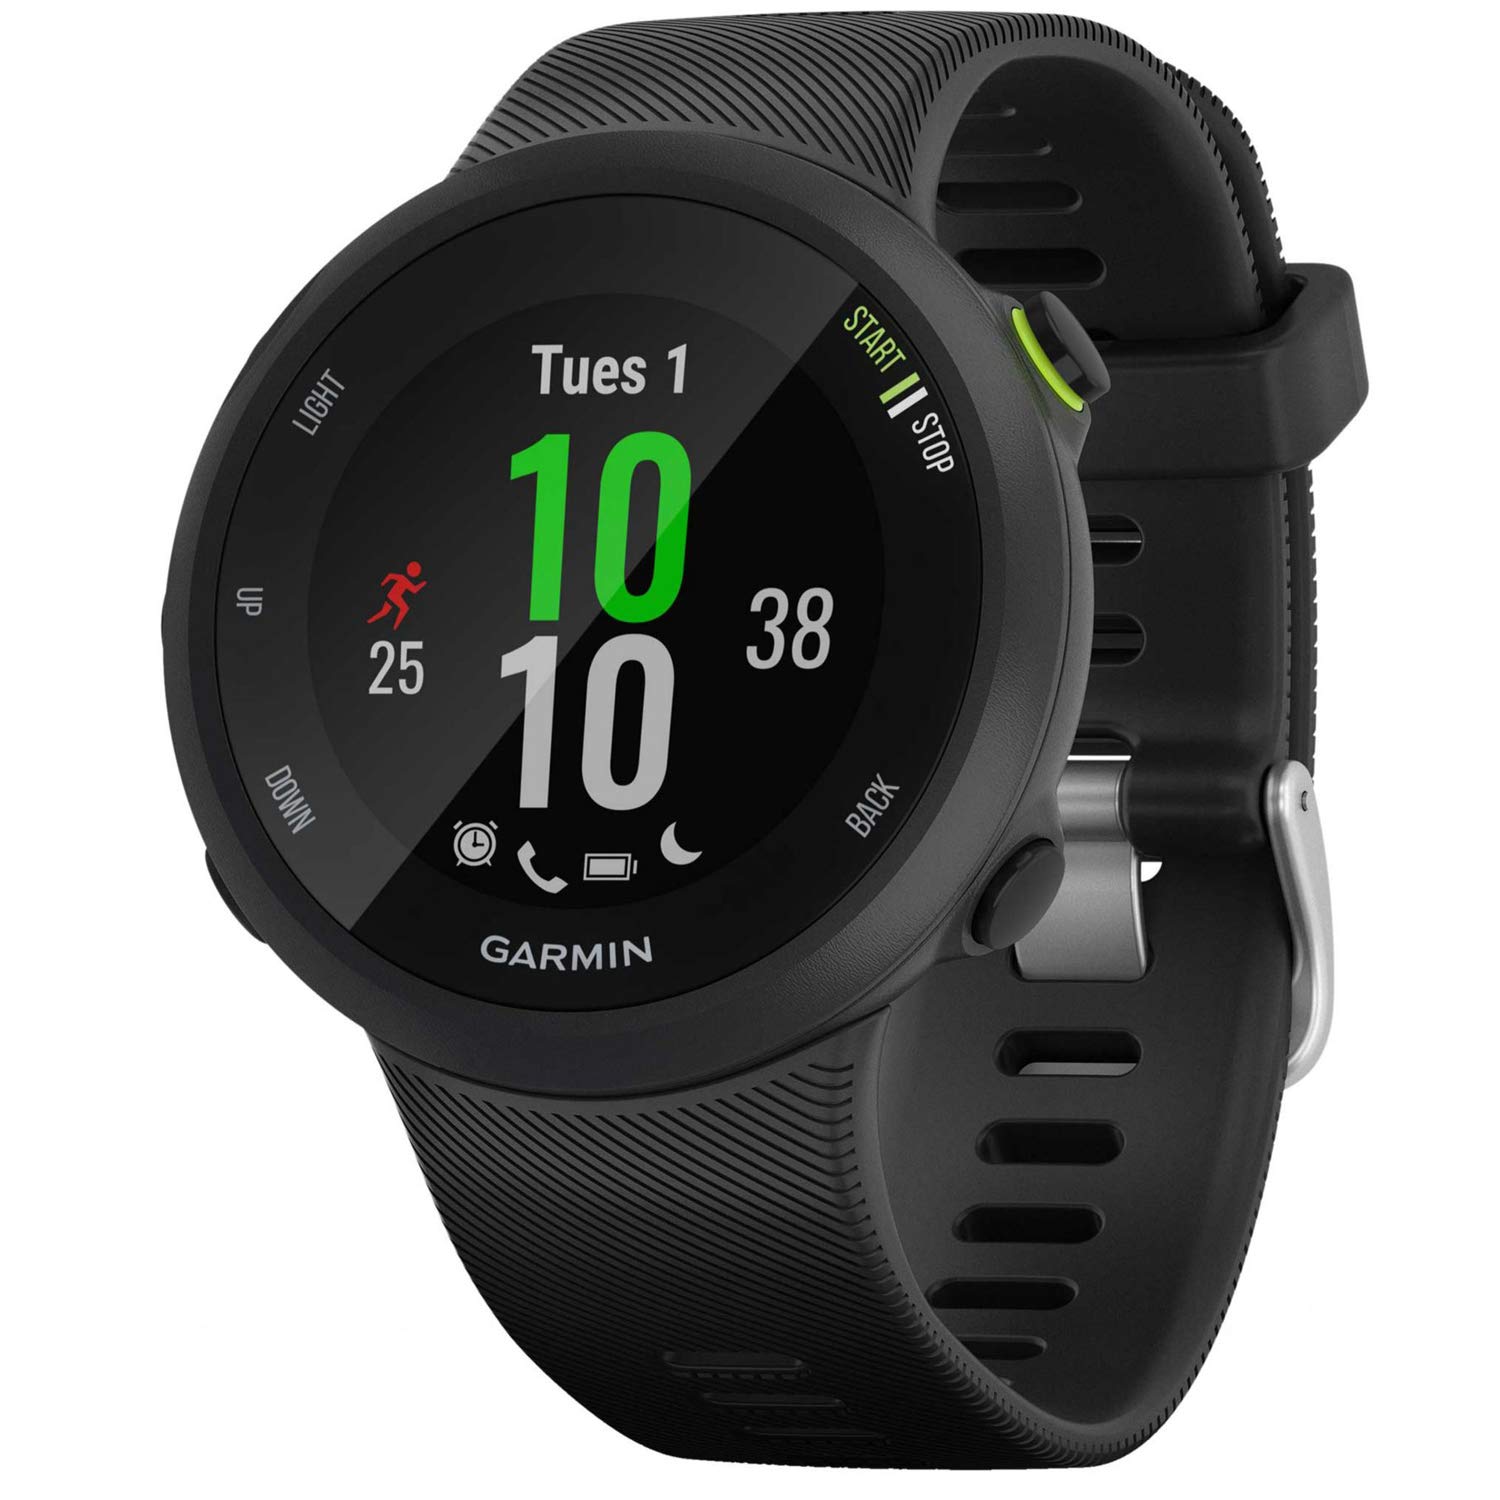 Garmin 010-N2156-05 Forerunner 45 GPS Heart Rate Monitor Running Smartwatch (Black) - (Renewed) with Tempered Glass Screen Protector